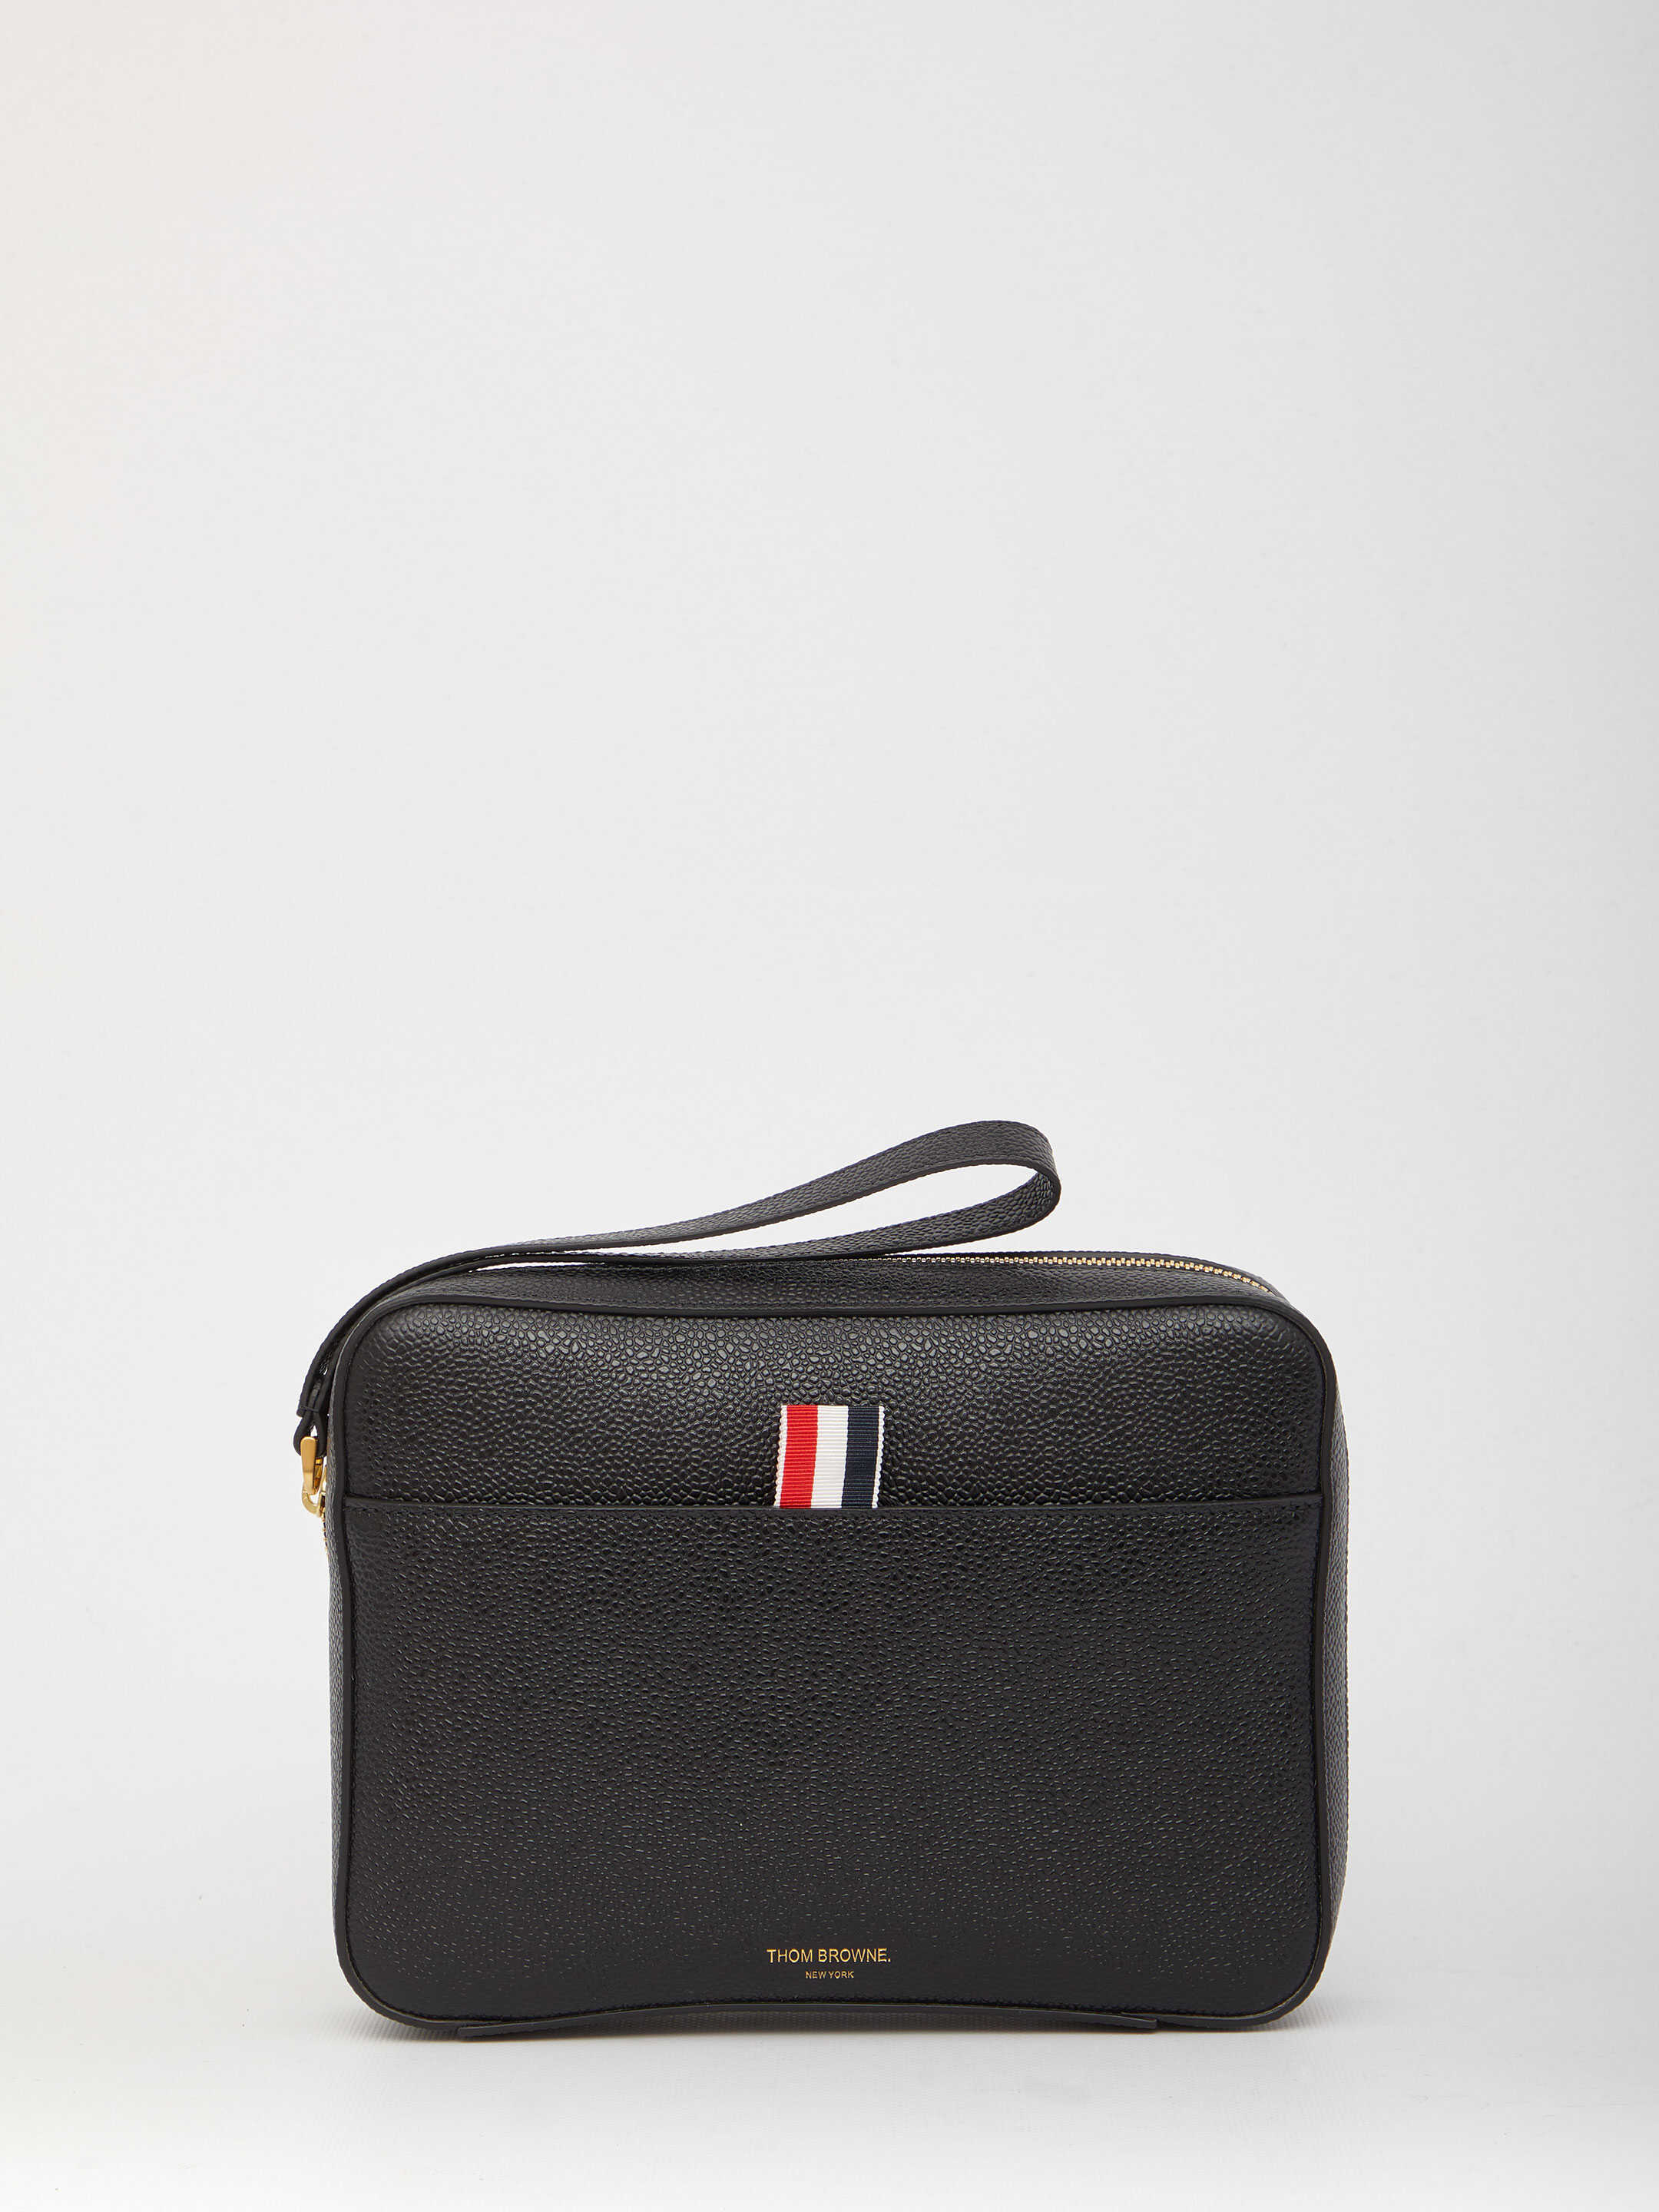 Thom Browne Leather Pouch Black b-mall.ro